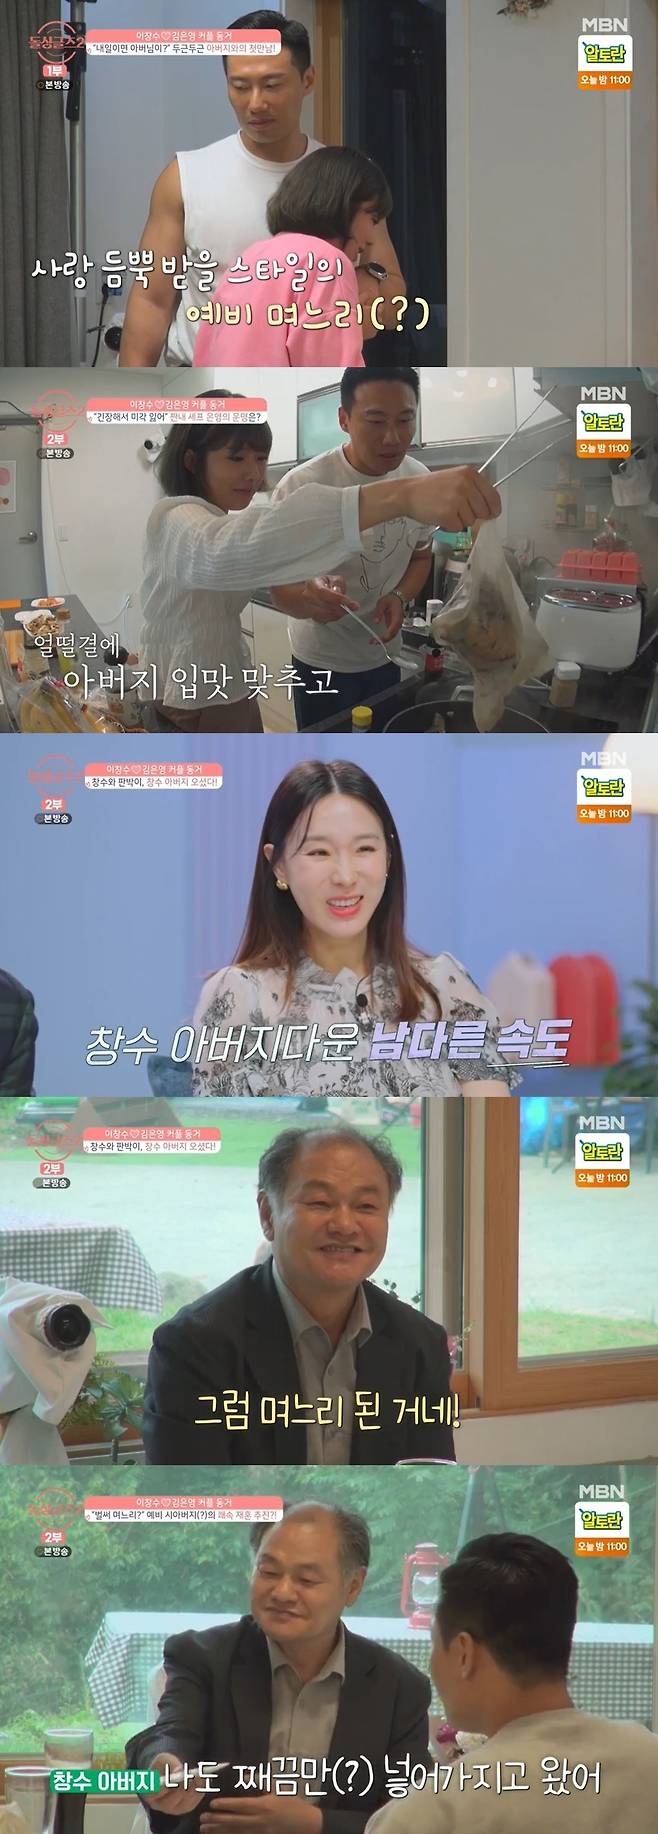 Li Chang-sus father showed a strong affinity for Kim Joo Eun-young.MBN Doll Singles 2 broadcast on December 19 revealed the daily life of couples living together.I think we can set it up if we try each other, Kim Joo Eun-young, who had a conflict with Li Chang-su over a South Sachin issue, told Friend.There was a bigger problem.Kim Joo Eun-young said, I did not tell my mother that I still have a baby.I think my parents will be upset when I meet such a caregiver in a divorced situation. When Friend asked, Is it going to be a deal? Kim Joo Eun-young said, Its nice and gentle when I see a baby, so Im fine.I think our hearts are the most important thing, Li Chang-su said.The next day Li Chang-sus father decided to visit.Then, when Li Chang-su called his father, Kim Joo Eun-young called him charmingly, saying, Come to your fathers body.My father replied with a lot of charm, Is it okay to go to the body? And If you want to eat something.Kim Joo Eun-young also said, I will wait for you to be delicious, and my father said, Do not prepare a lot of baby seeds to reduce the burden on Kim Joo Eun-young.Im on a diet, he said sensibly.The next day Li Chang-su and Joo Eun-young were busy preparing their own dishes.When his father arrived, he met Li Chang-sus father in a state of tension.Li Chang-sus father presented a variety of fruits that Kim Joo Eun-young liked, and then said, My son is good at lying.I said, How pretty is it? And he said, Not much is pretty. But when I see it, it is very pretty.RE: The father, who discovered the wedding photo, laughed cheerfully, saying, So are you married, are you a daughter-in-law?He also told Li Chang-su that if he got married, he would have to give him his allowance (Lee Chang-sung) for economical things, or that while Kim Joo Eun-young was away for a while, I like it.Then he laughed at Kim Joo Eun-youngs coat gift for himself and said, I have put a little bit.This is two money for Date, he said, handing Kim Joo Eun-young an envelope with 500,000 won in cash.My father said, I still have to go out with you. If you say you will marry anytime, you will welcome me.If you two are good, you do not want to live well, he said.The father, who ate with the two and asked for a careful marriage, said, I can not meet often because I am far away. Joo Eun-young has no car., Im going to take The Red Car out when I get married. Im telling you, if you save one million won a month, Ill add one million won.As much as I save, he promised to admire the MCs.